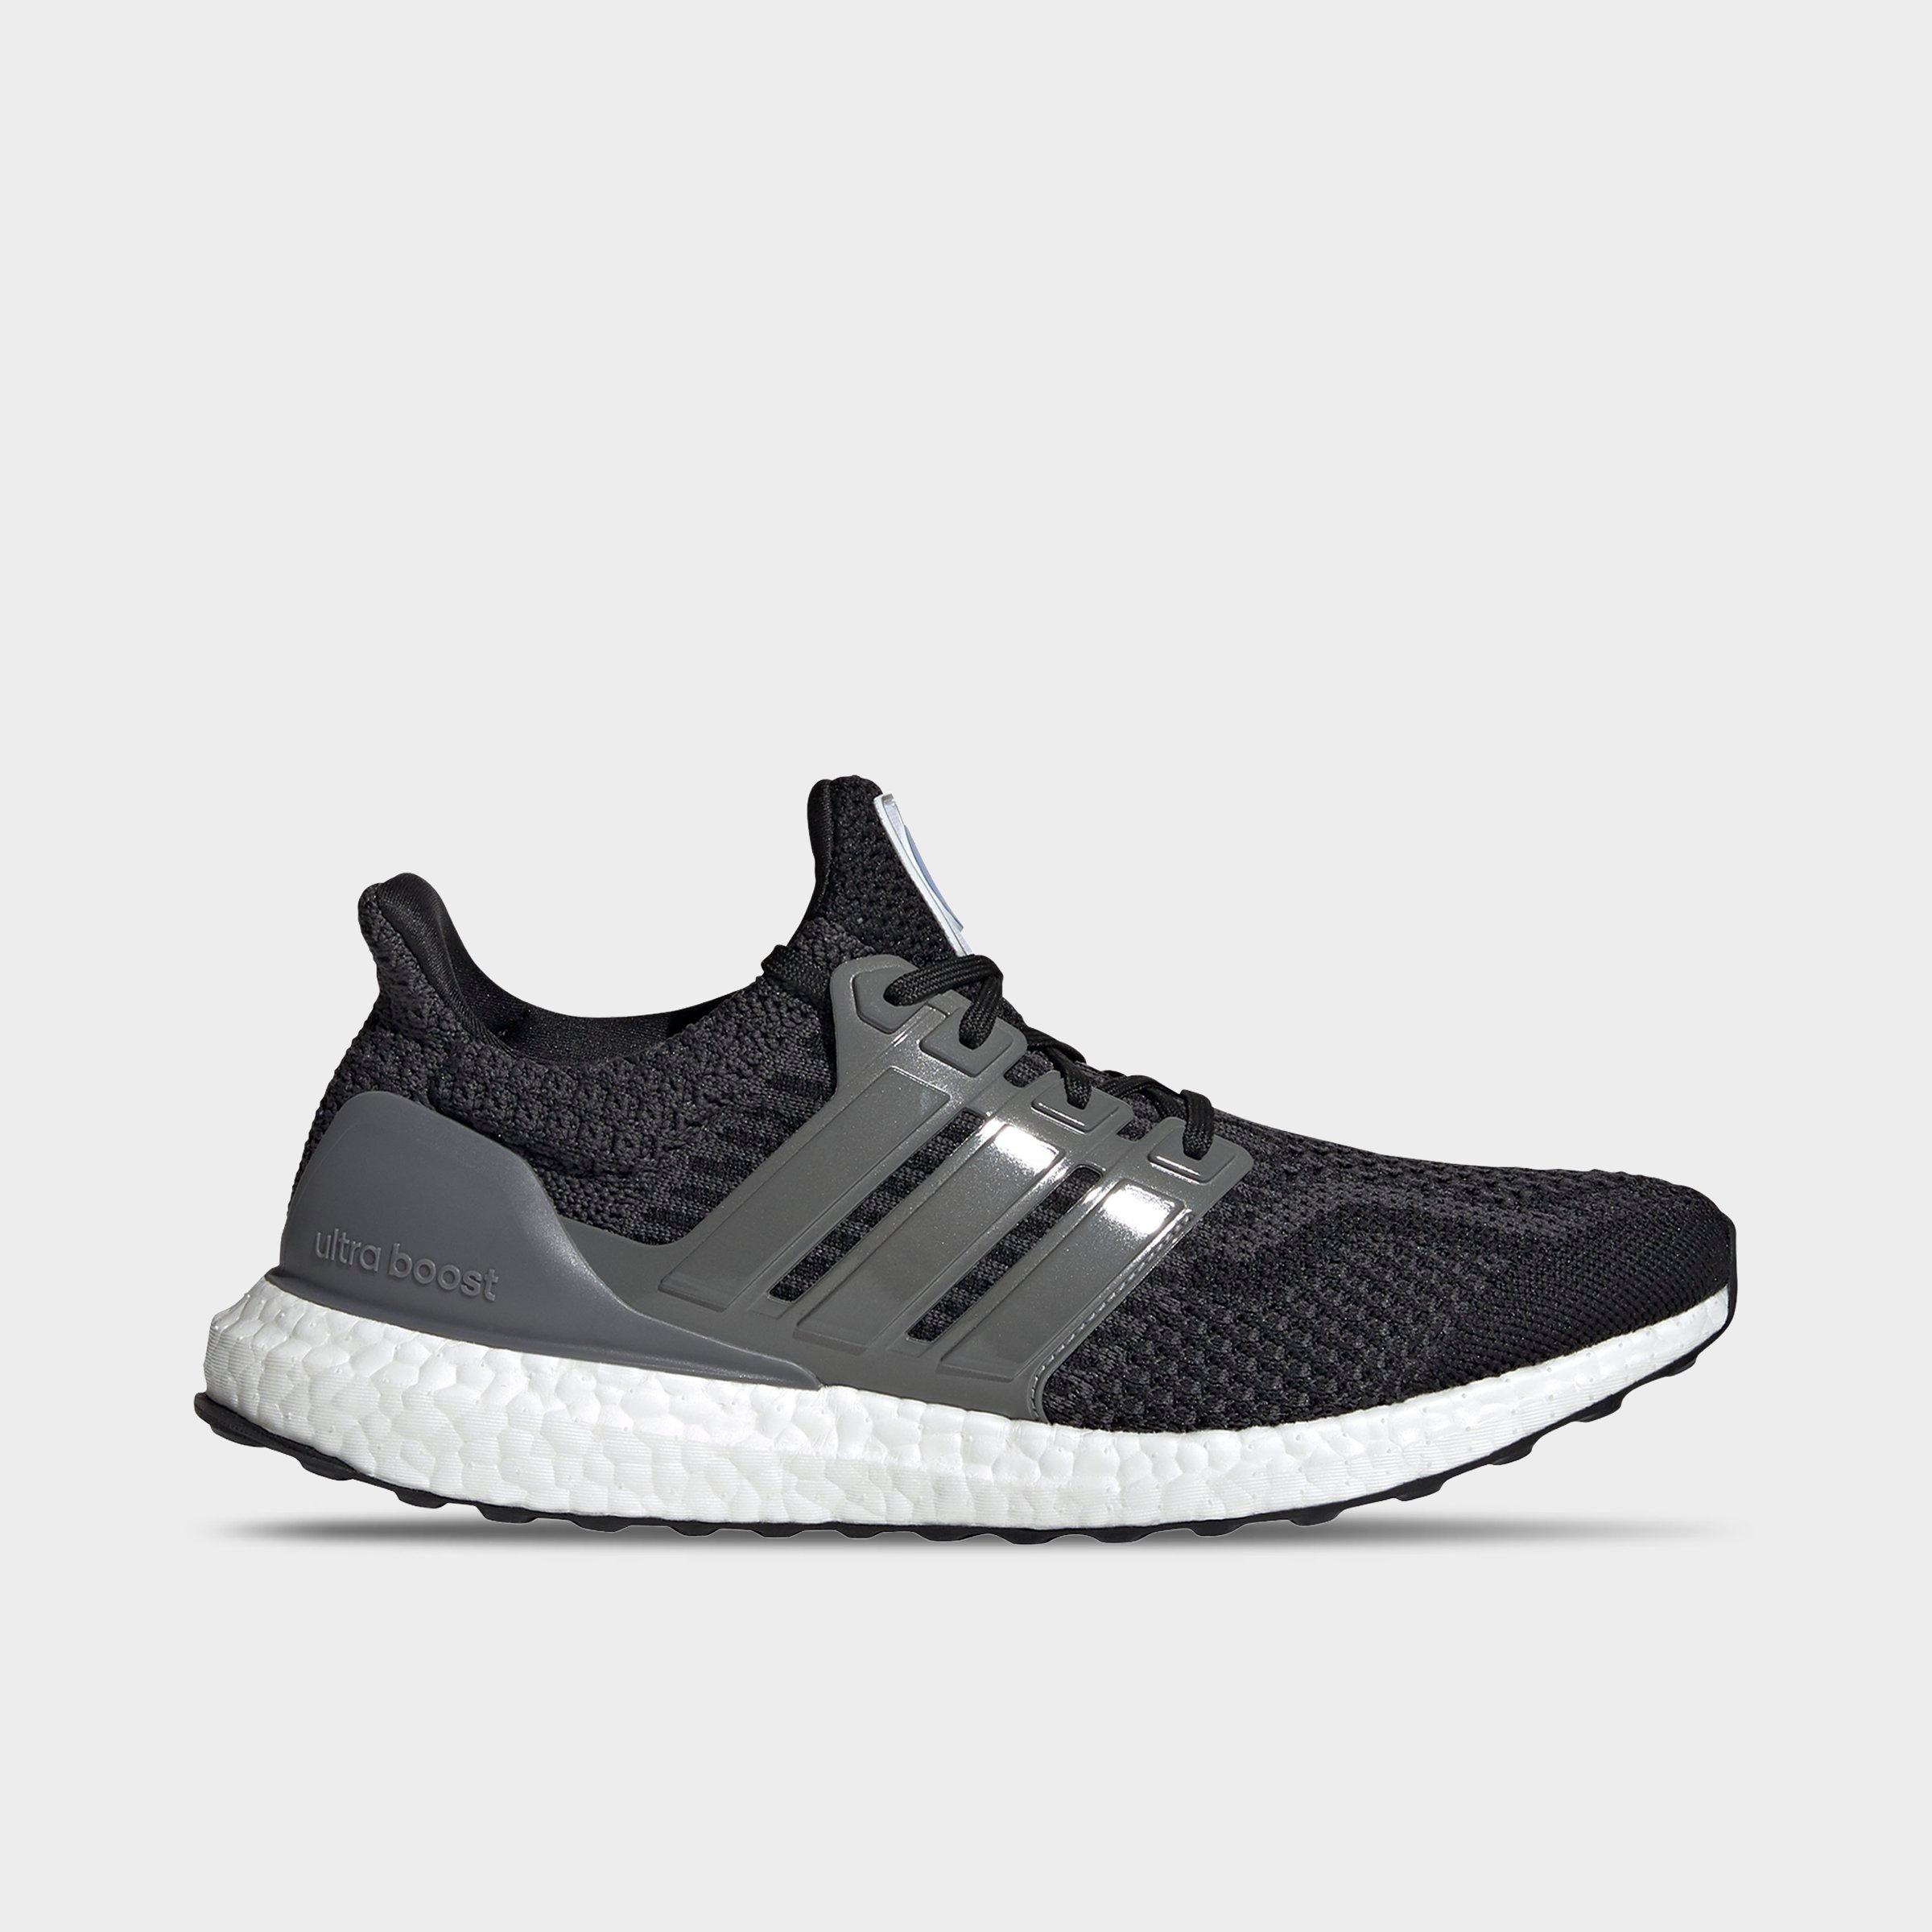 adidas ultra boost mens size 11